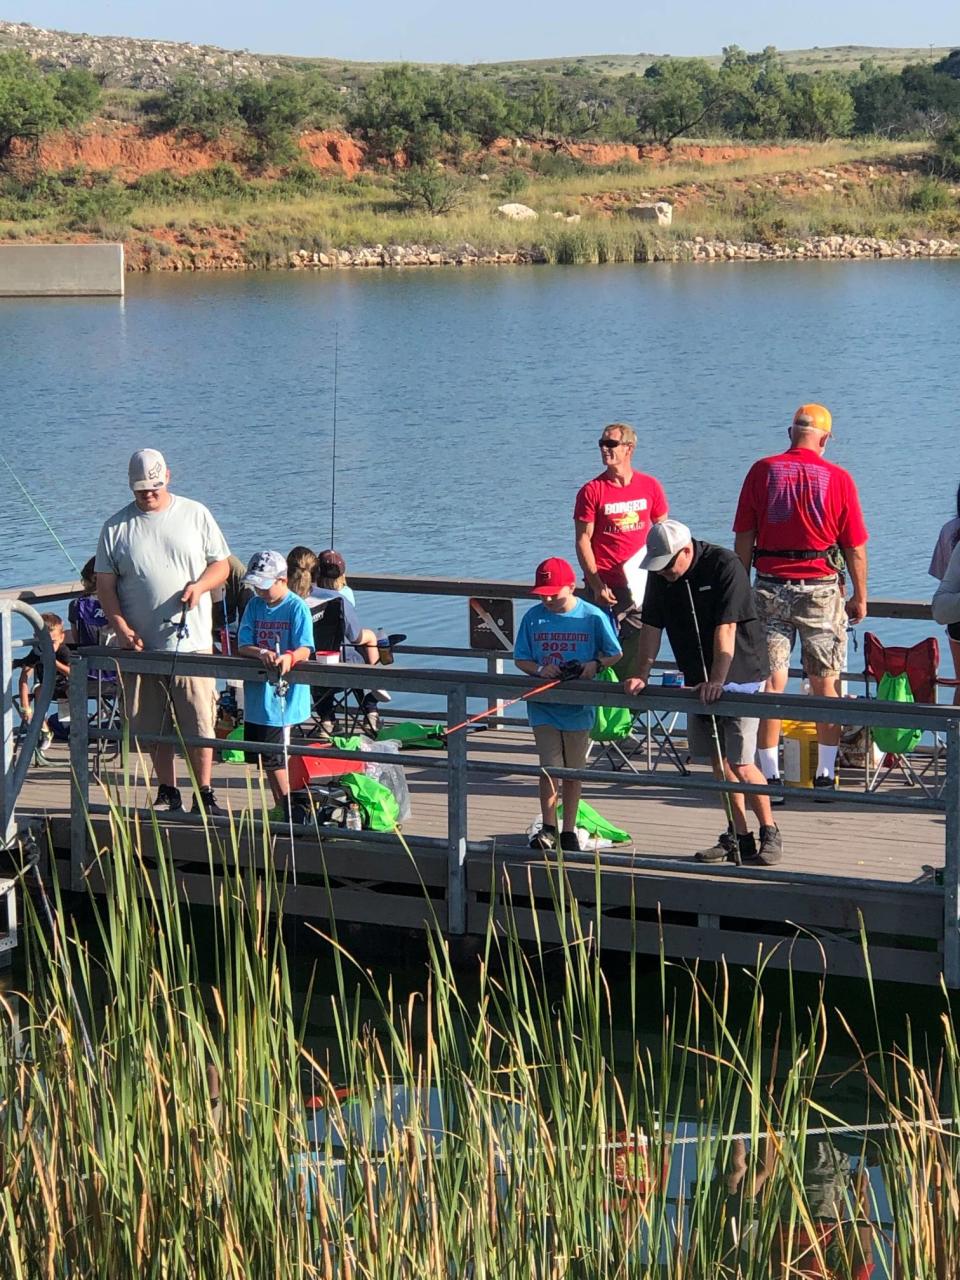 Lake Meredith Small Fry Fishing Tournament hosts their annual tournament Saturday morning at the Lake Meredith Stilling Basin in Spring Canyon. The event will include giveaways, food and tournament prizes.